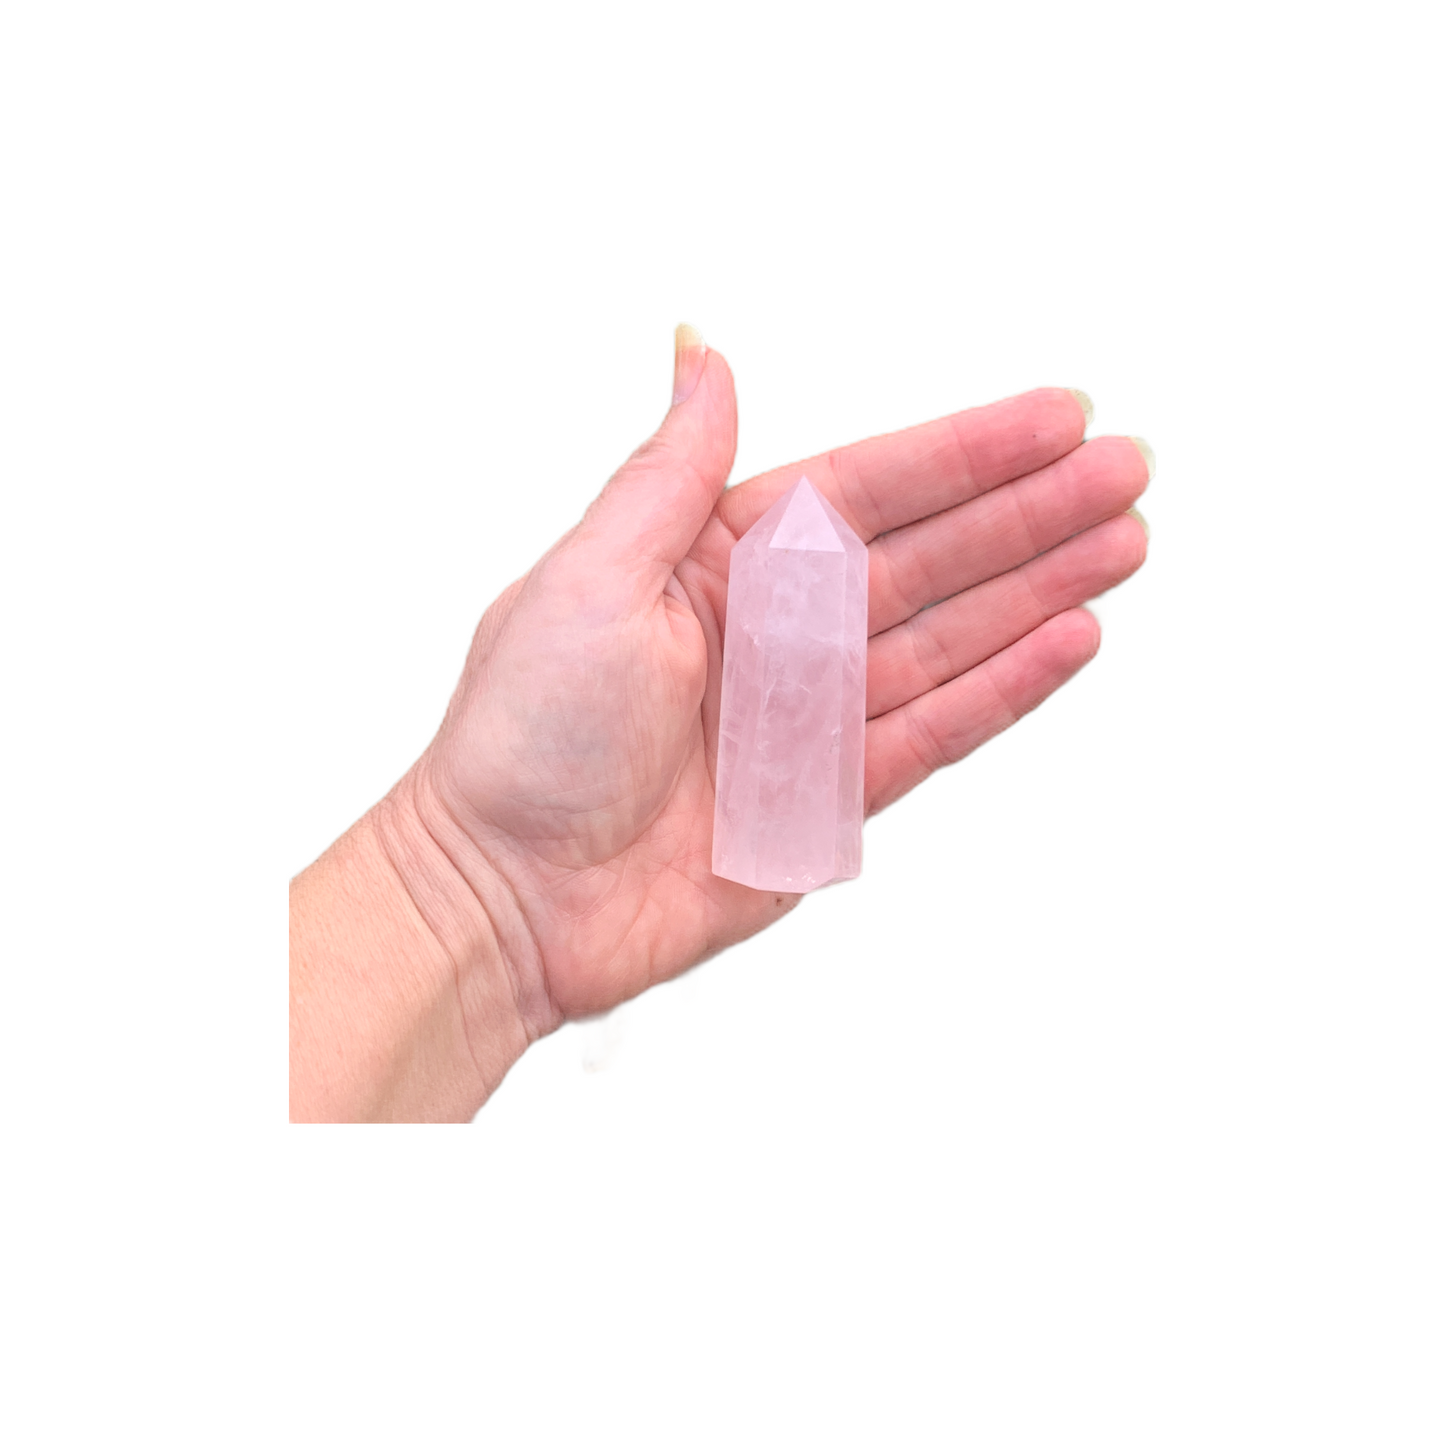 Stone Point Crystal Tower Rose Quartz with Hand for Scale 3-5 Inches